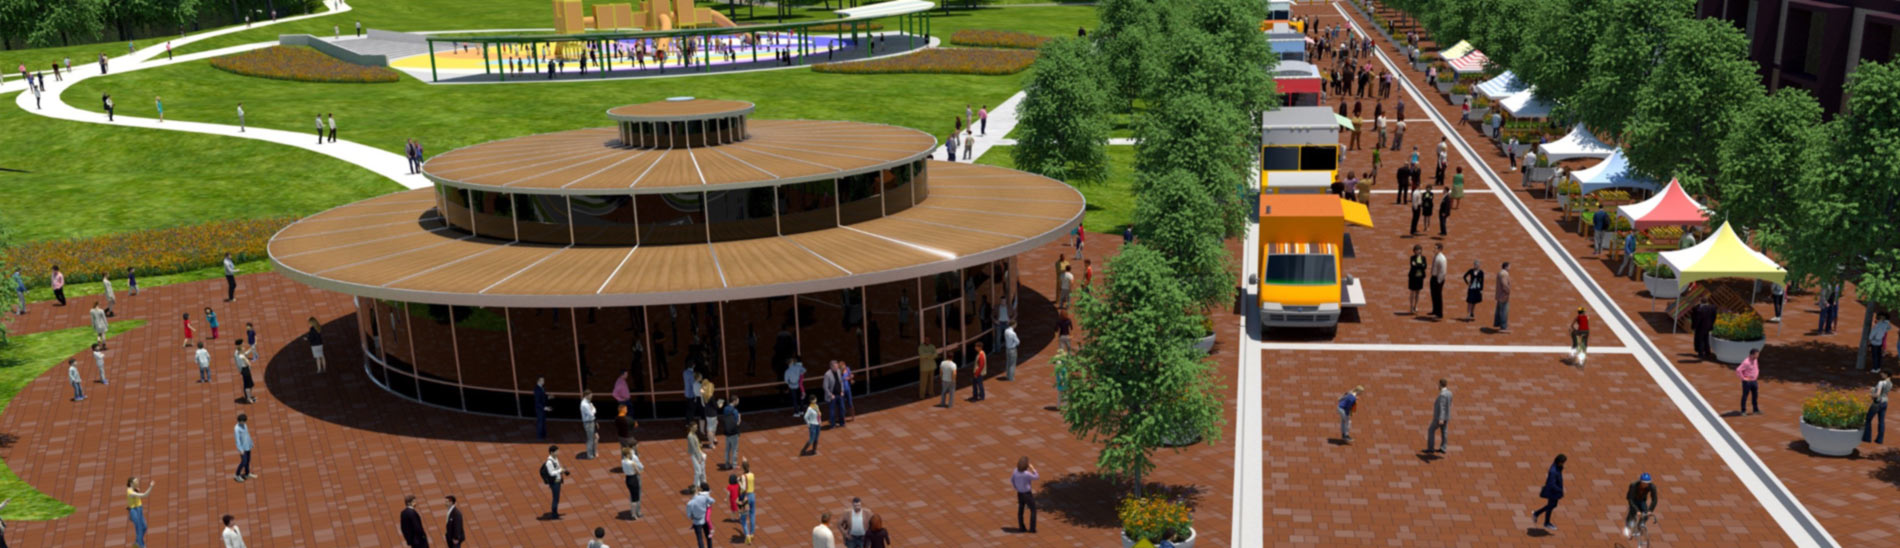 A rendering of the proposed Czech Village Roundhouse project